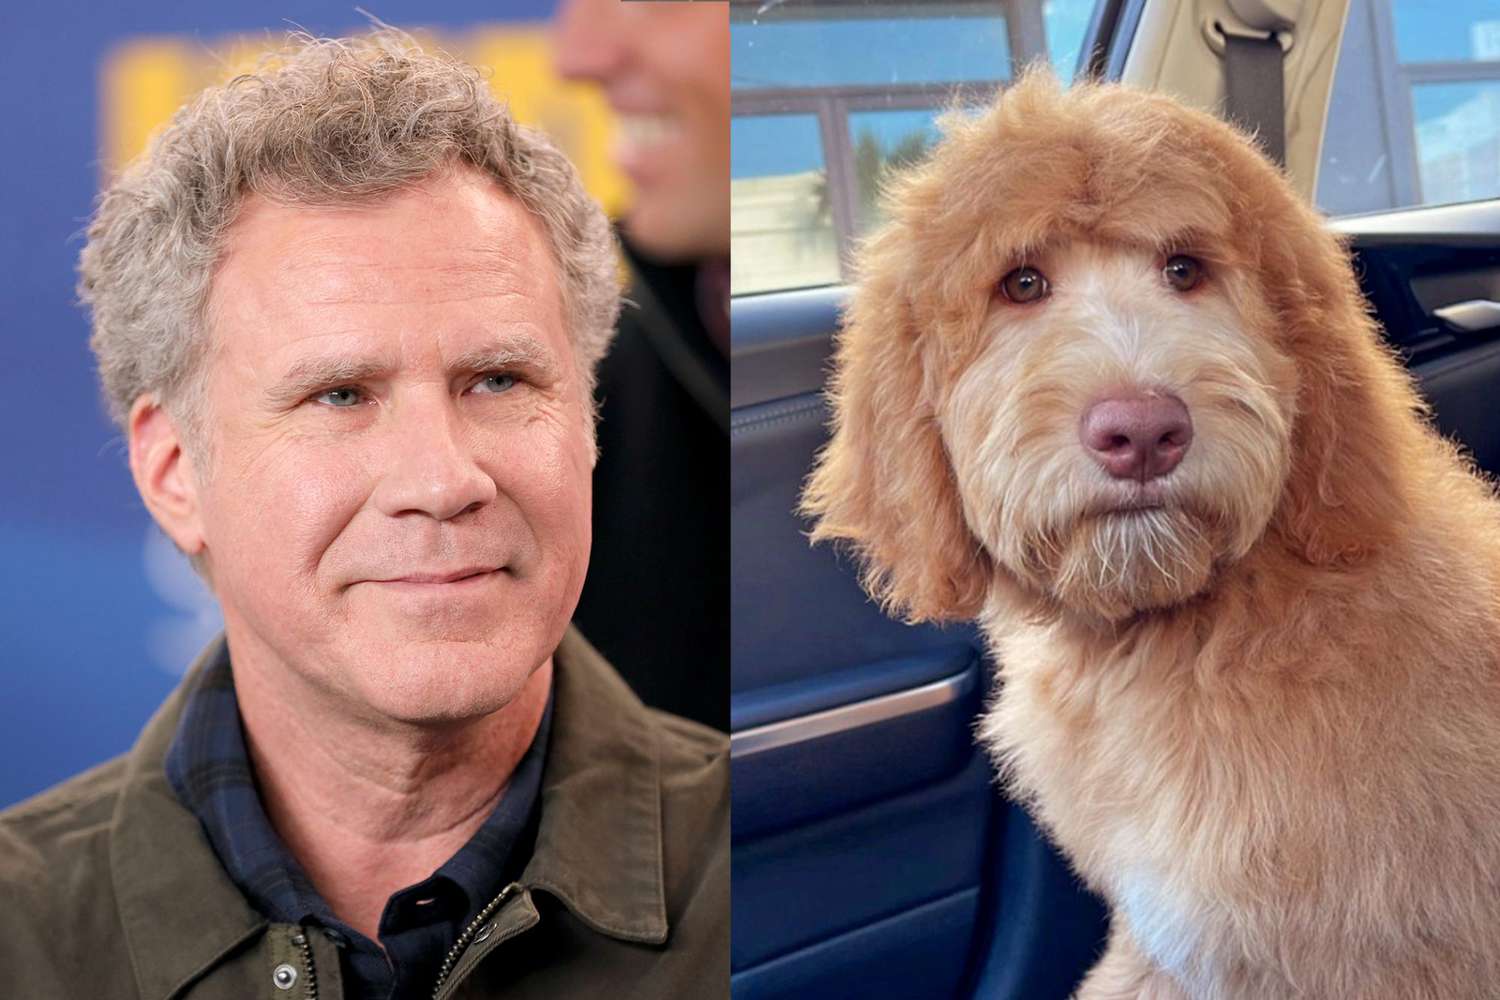 image of Will Ferrell along side of a dog that is his look alike